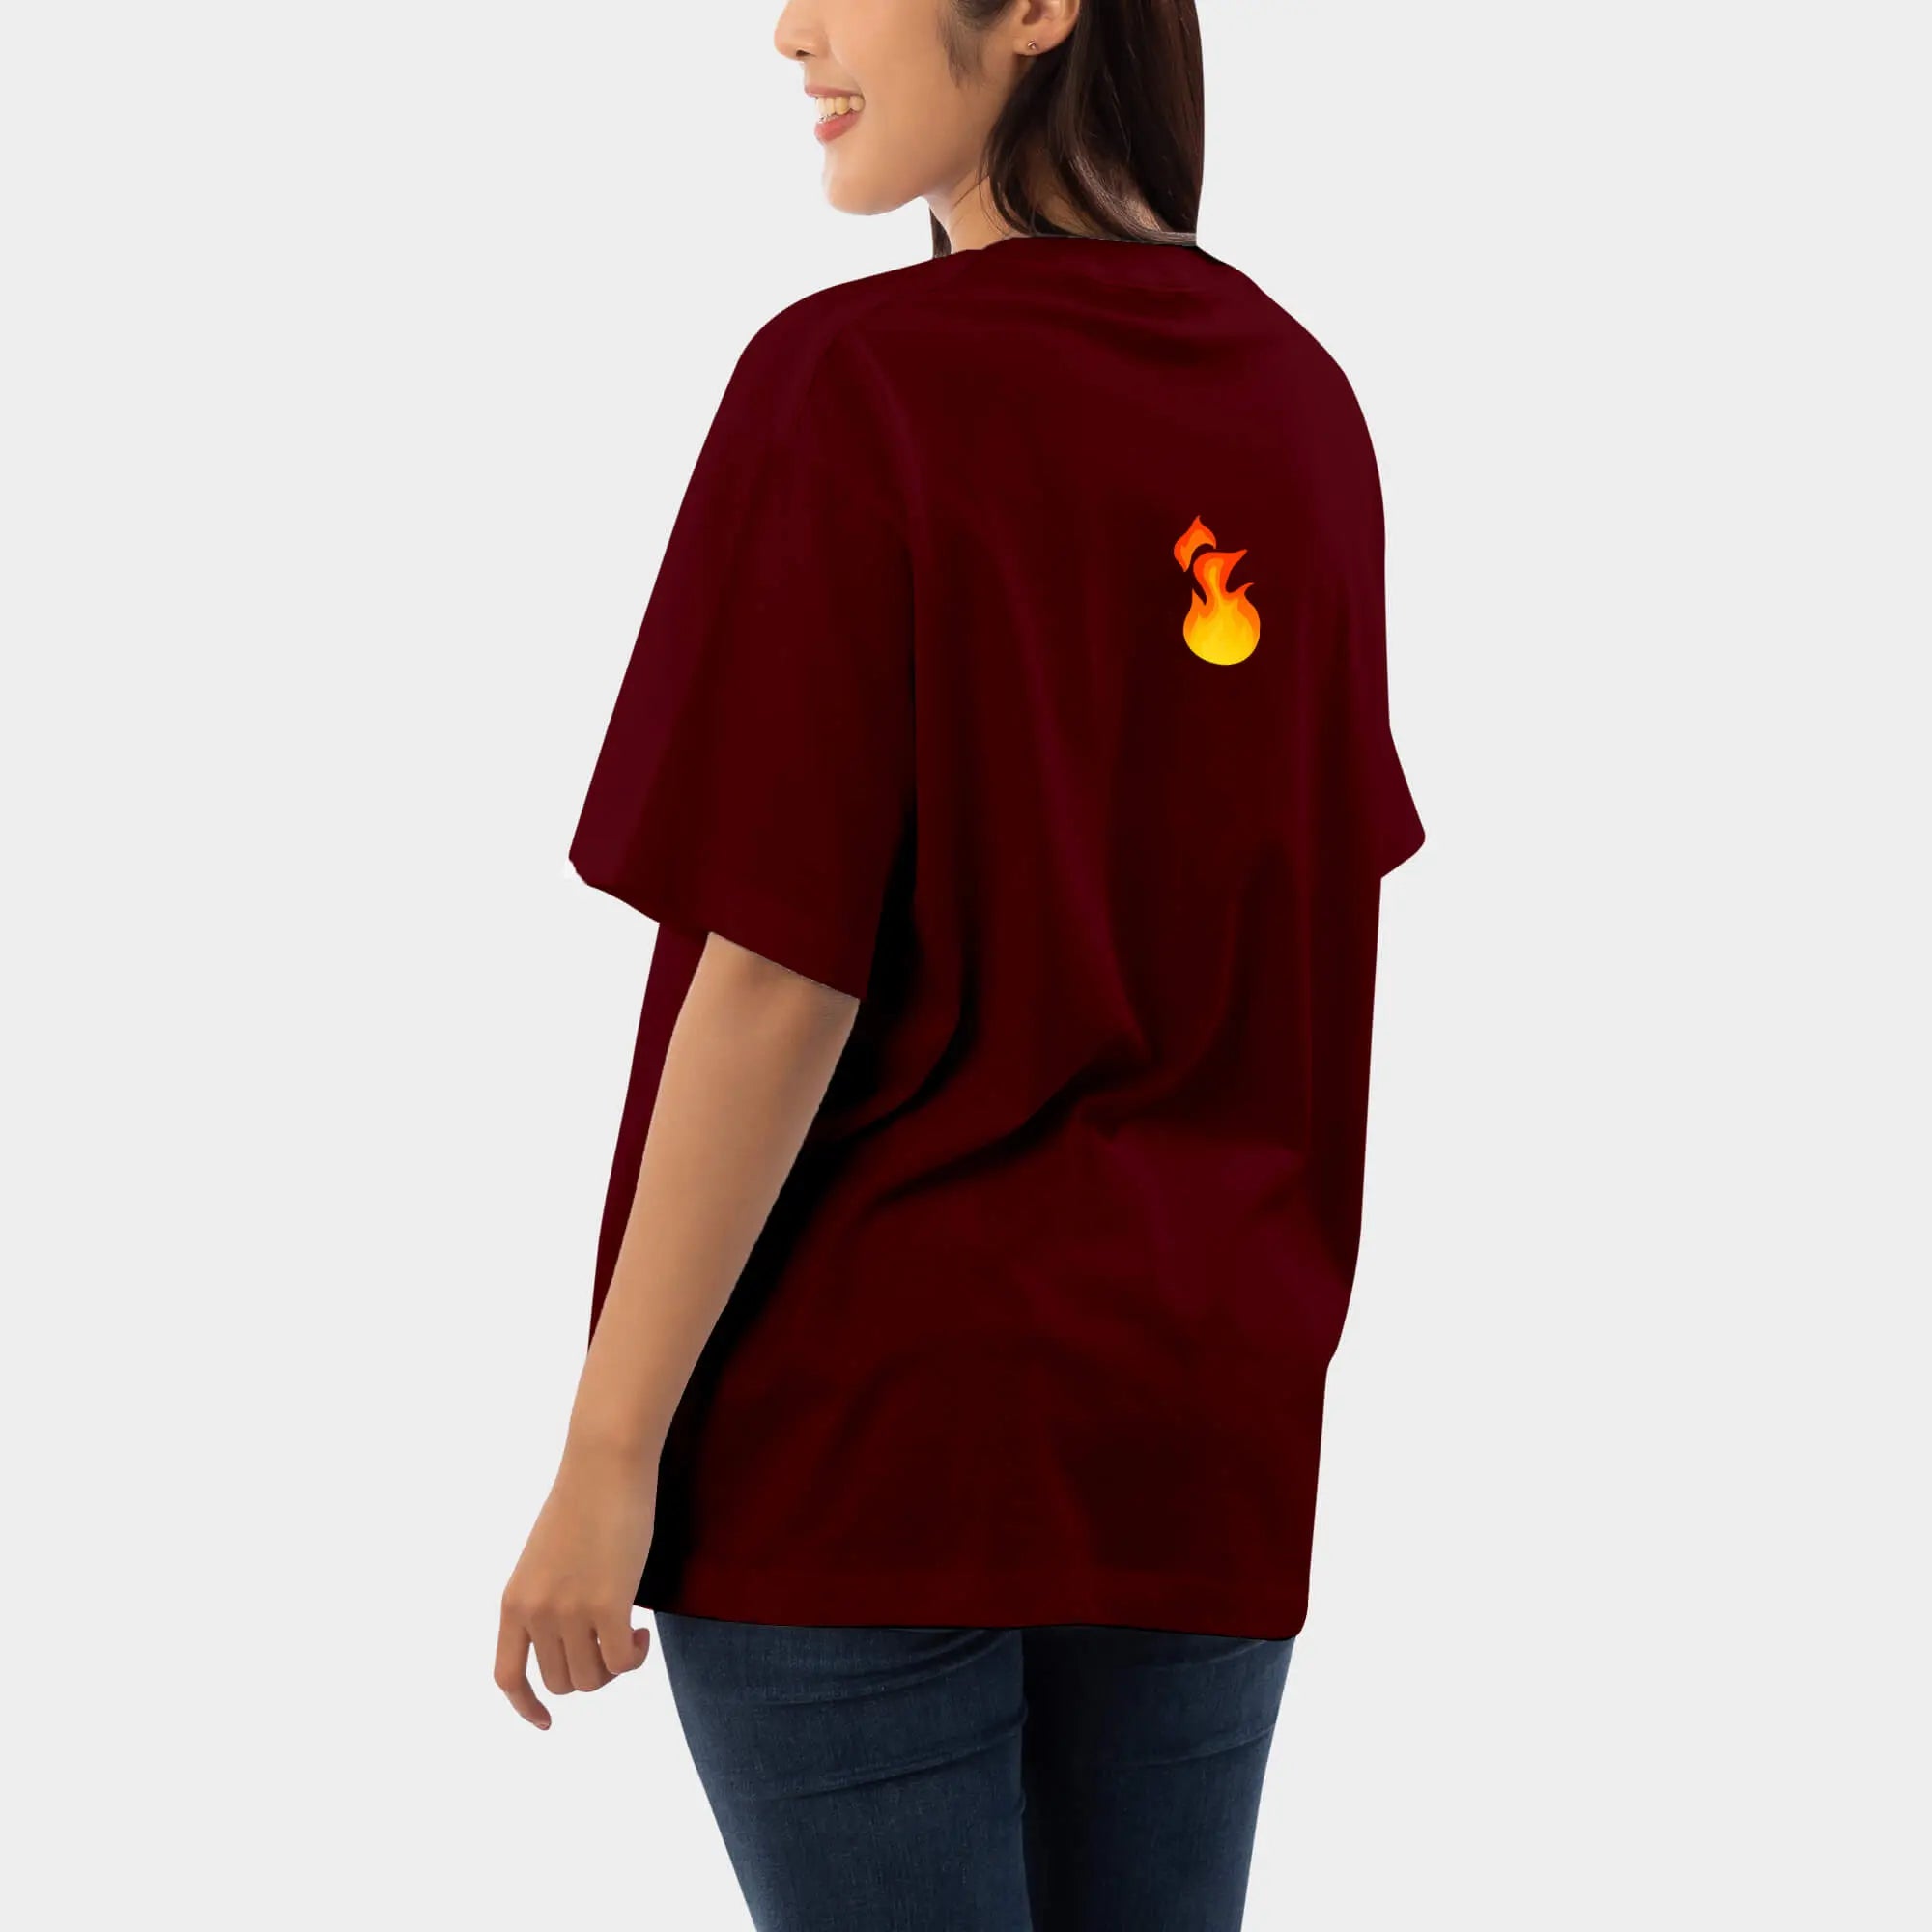 Fire Oversized T Shirt Online In India | Unisex Baggy Tees